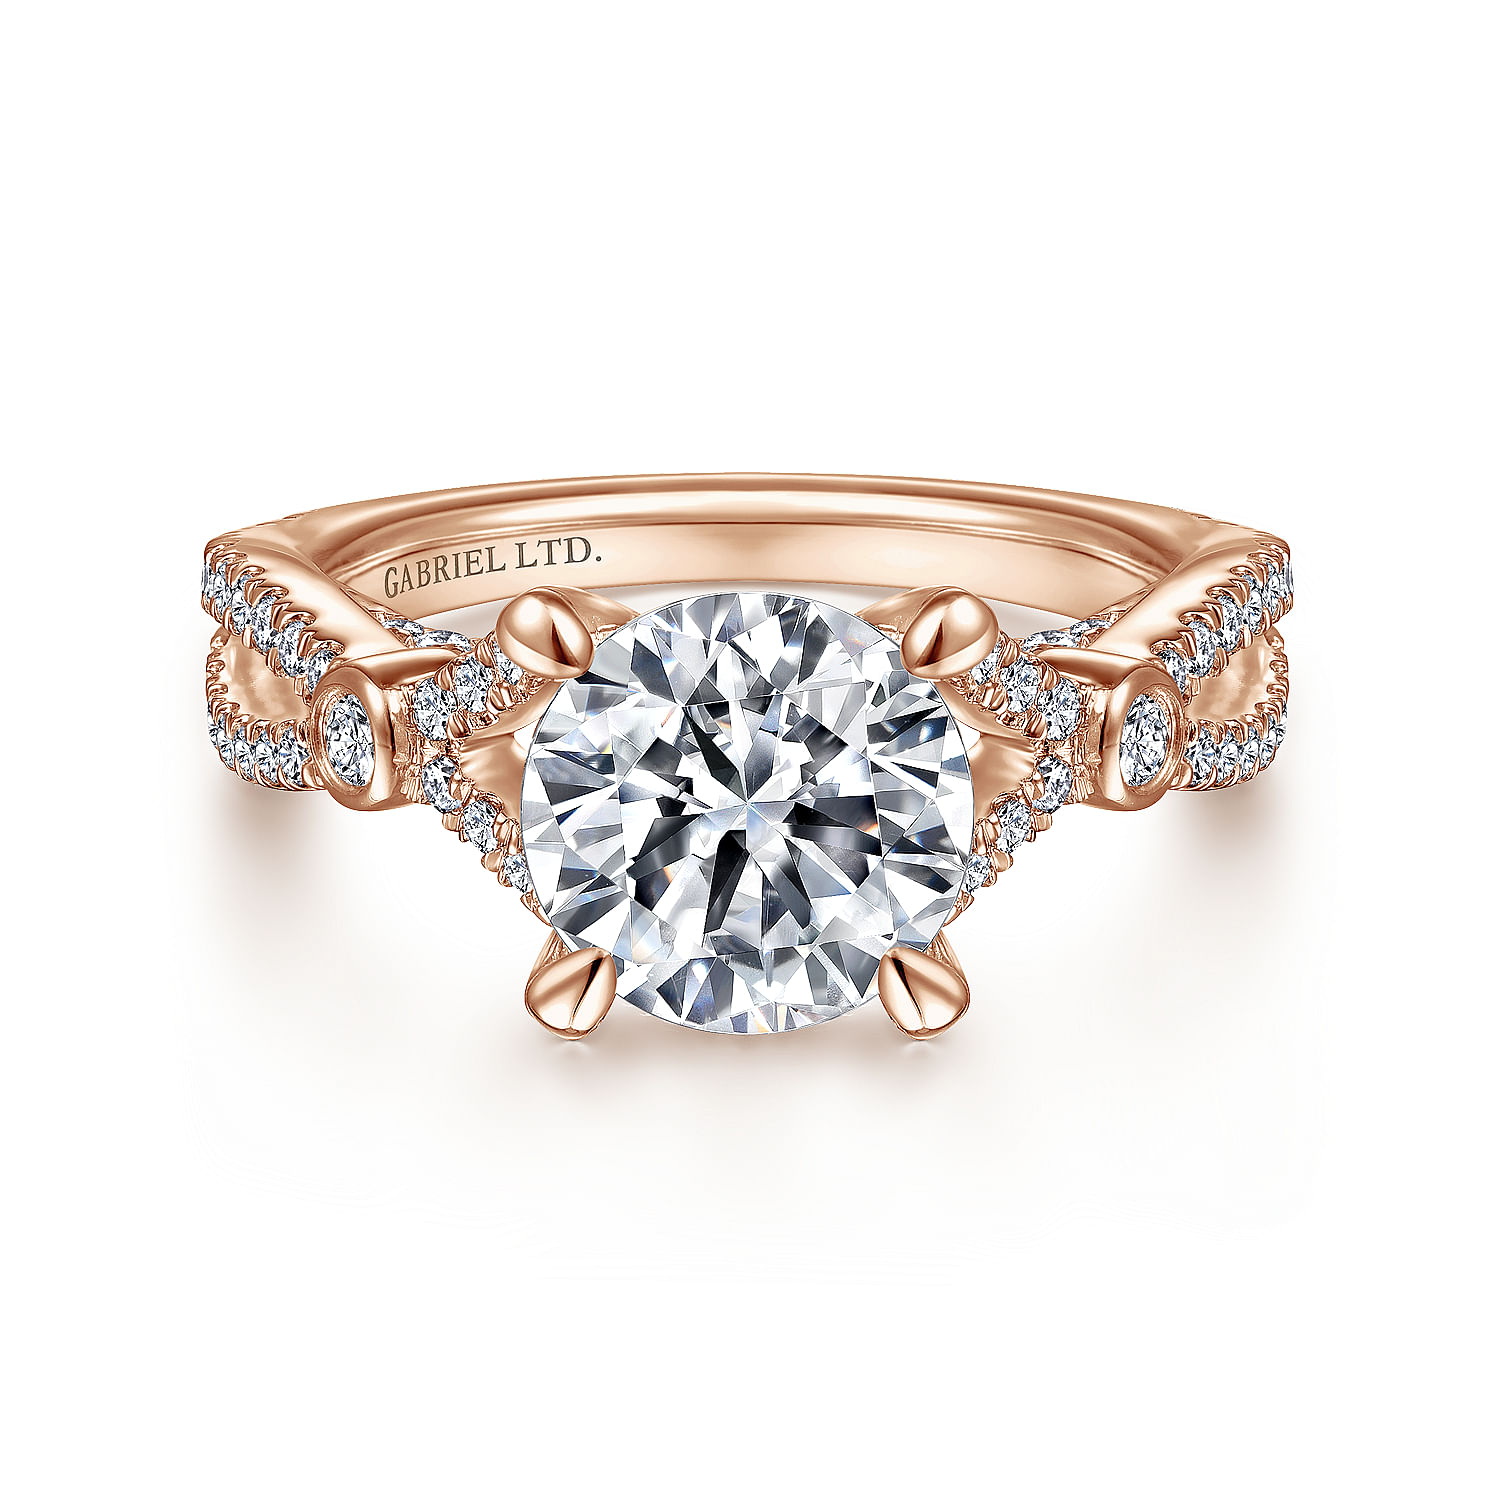 Unique - 18K Rose Gold Twisted Round Diamond Engagement Ring